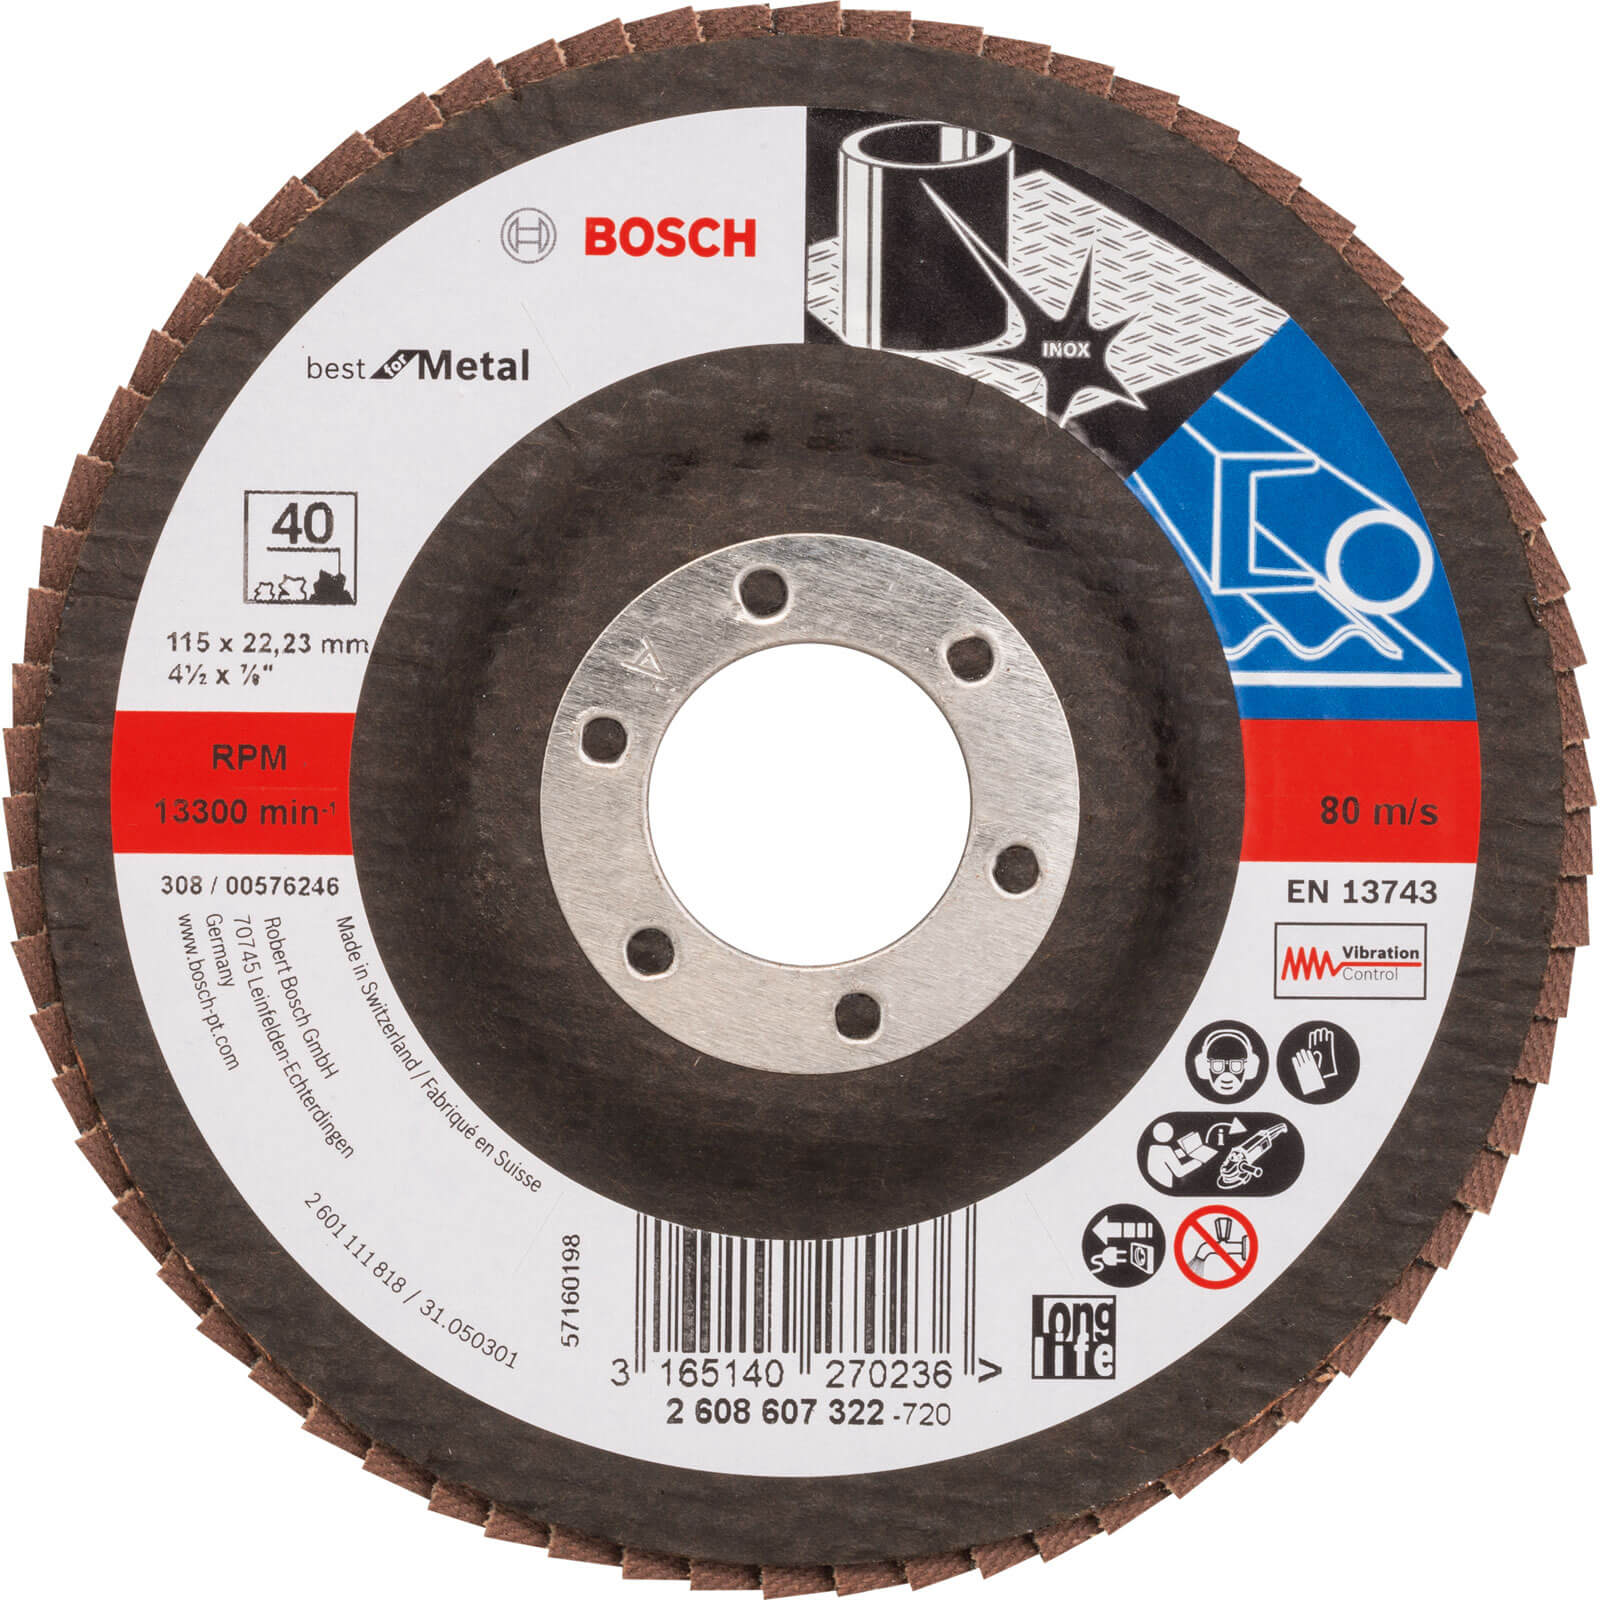 Image of Bosch X571 Best for Metal Straight Flap Disc 115mm 40g Pack of 1